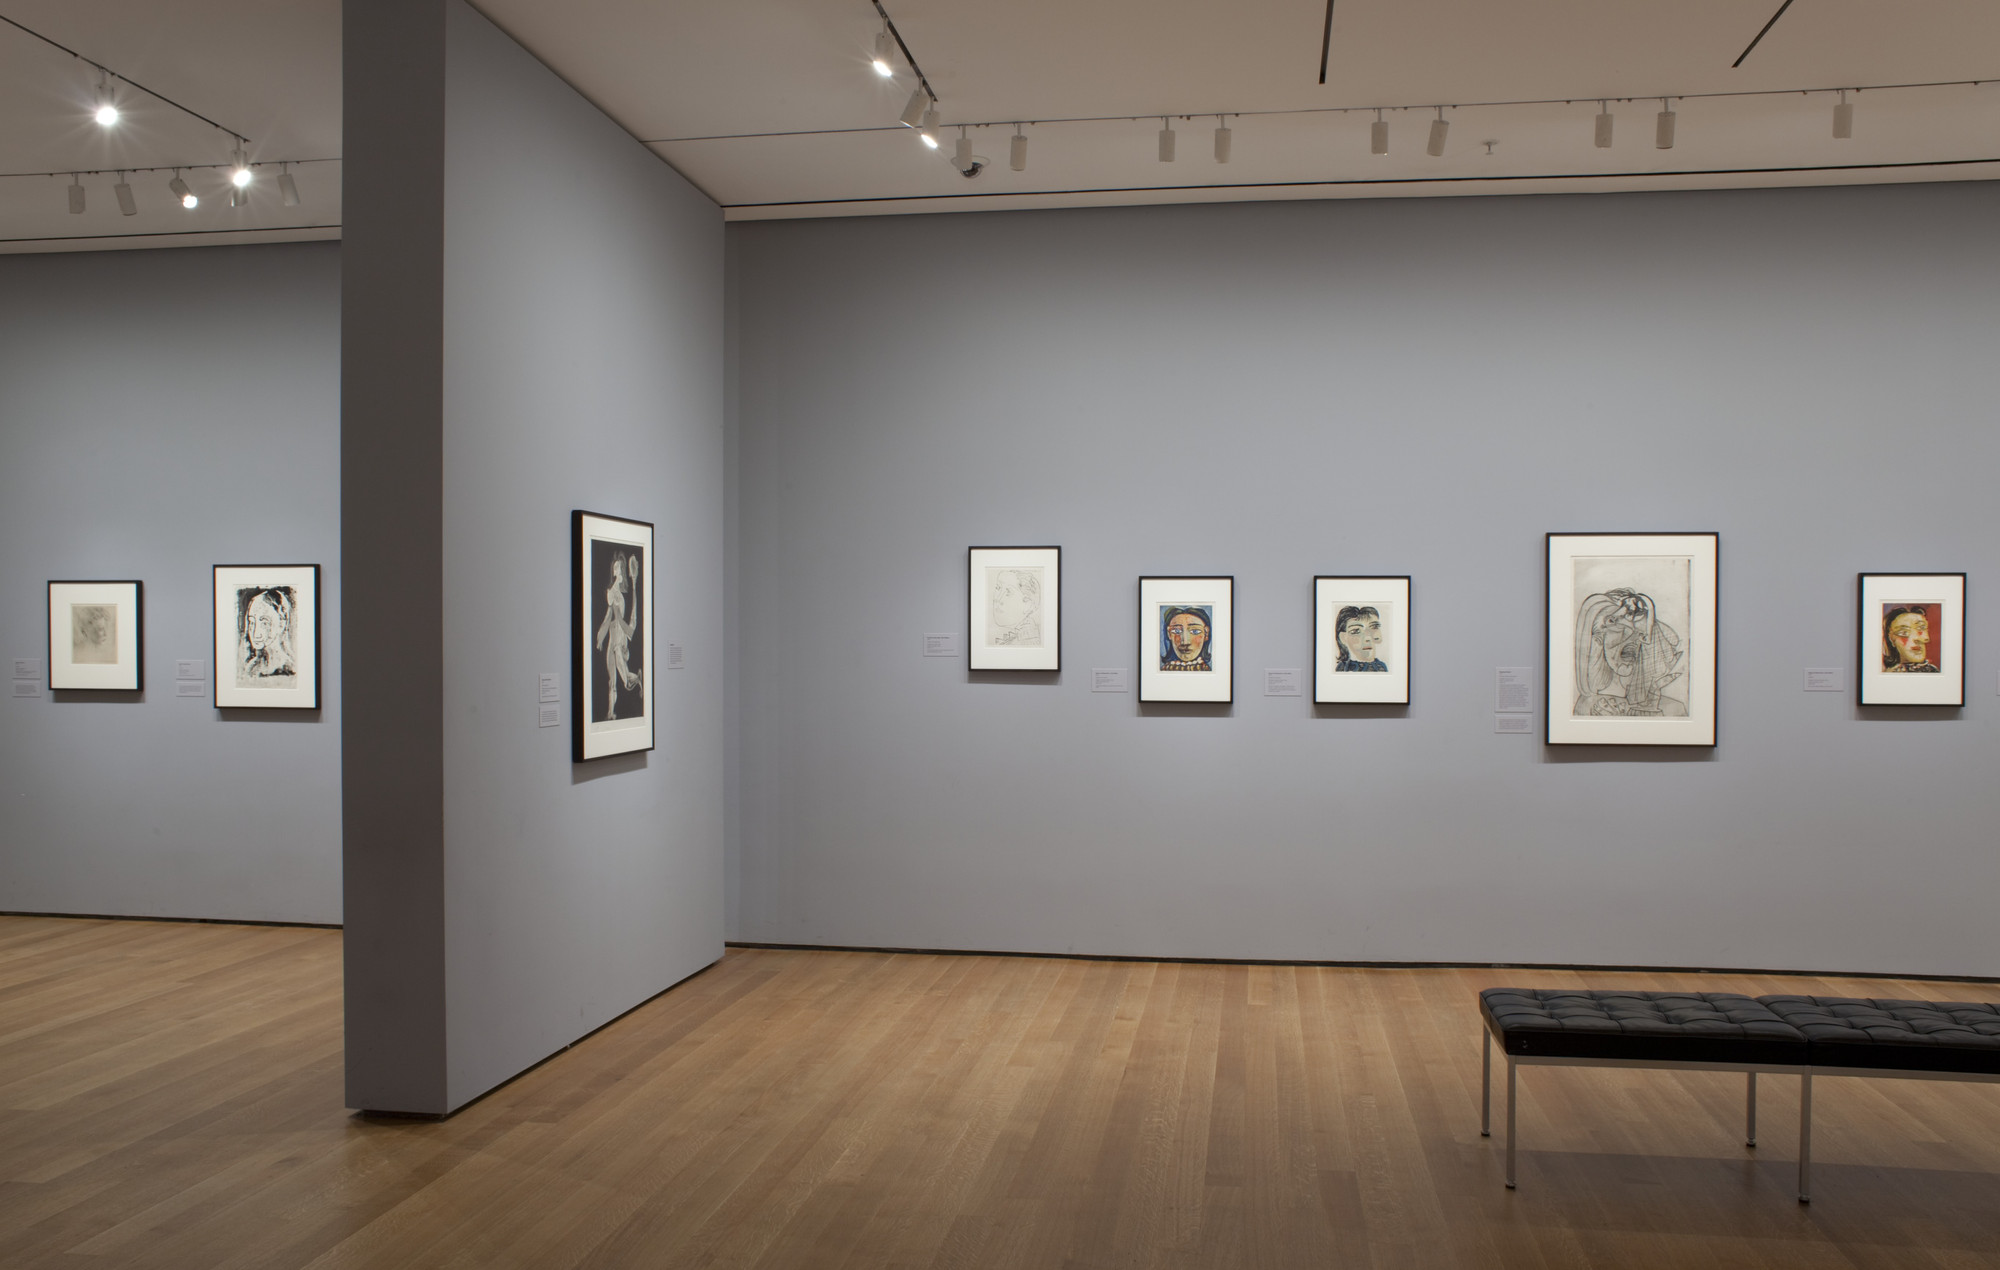 Installation view of the exhibition, "Picasso Themes and Variations